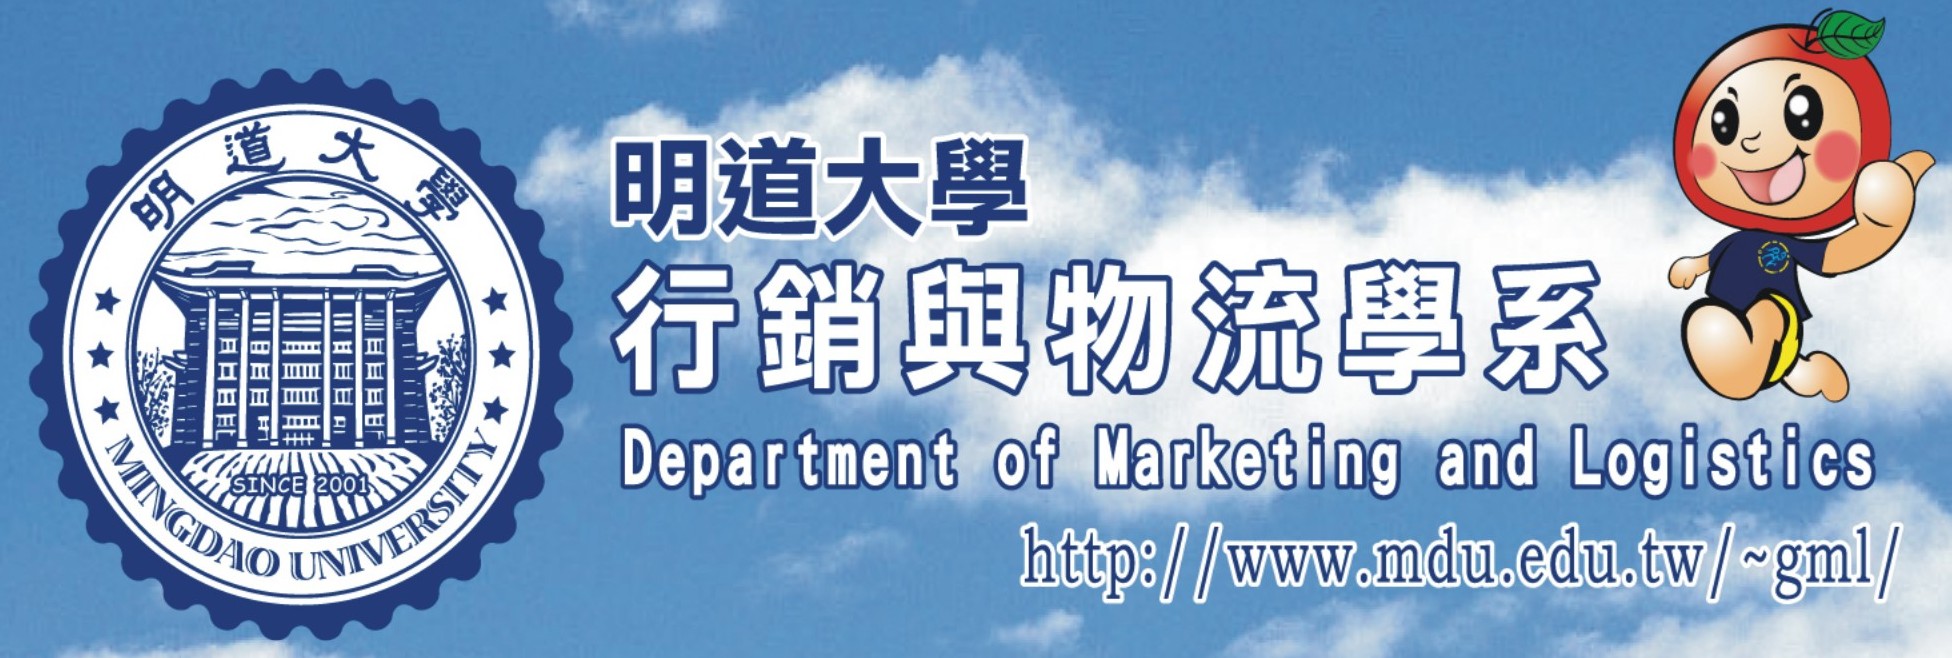 Department of Marketing and Logistics